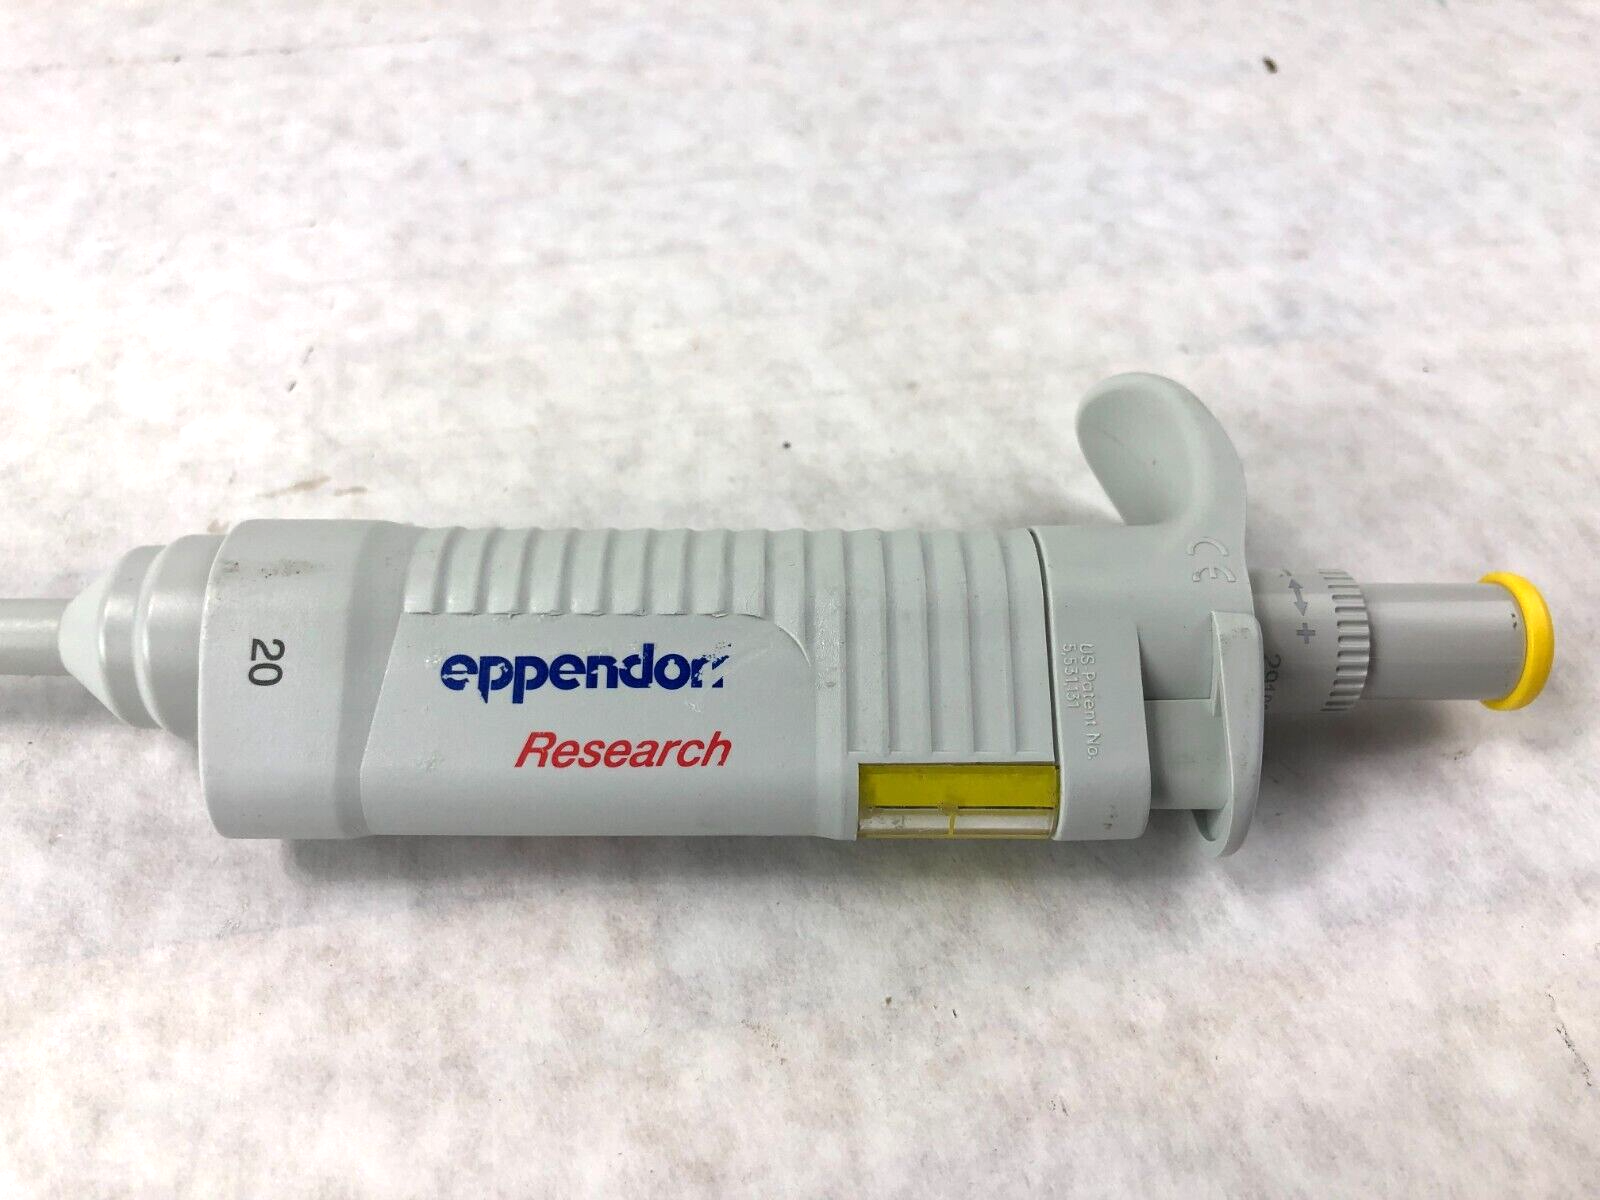 Lot of 2 Eppendorf Research 10 20 .5-10ul 2-20ul Pipettes